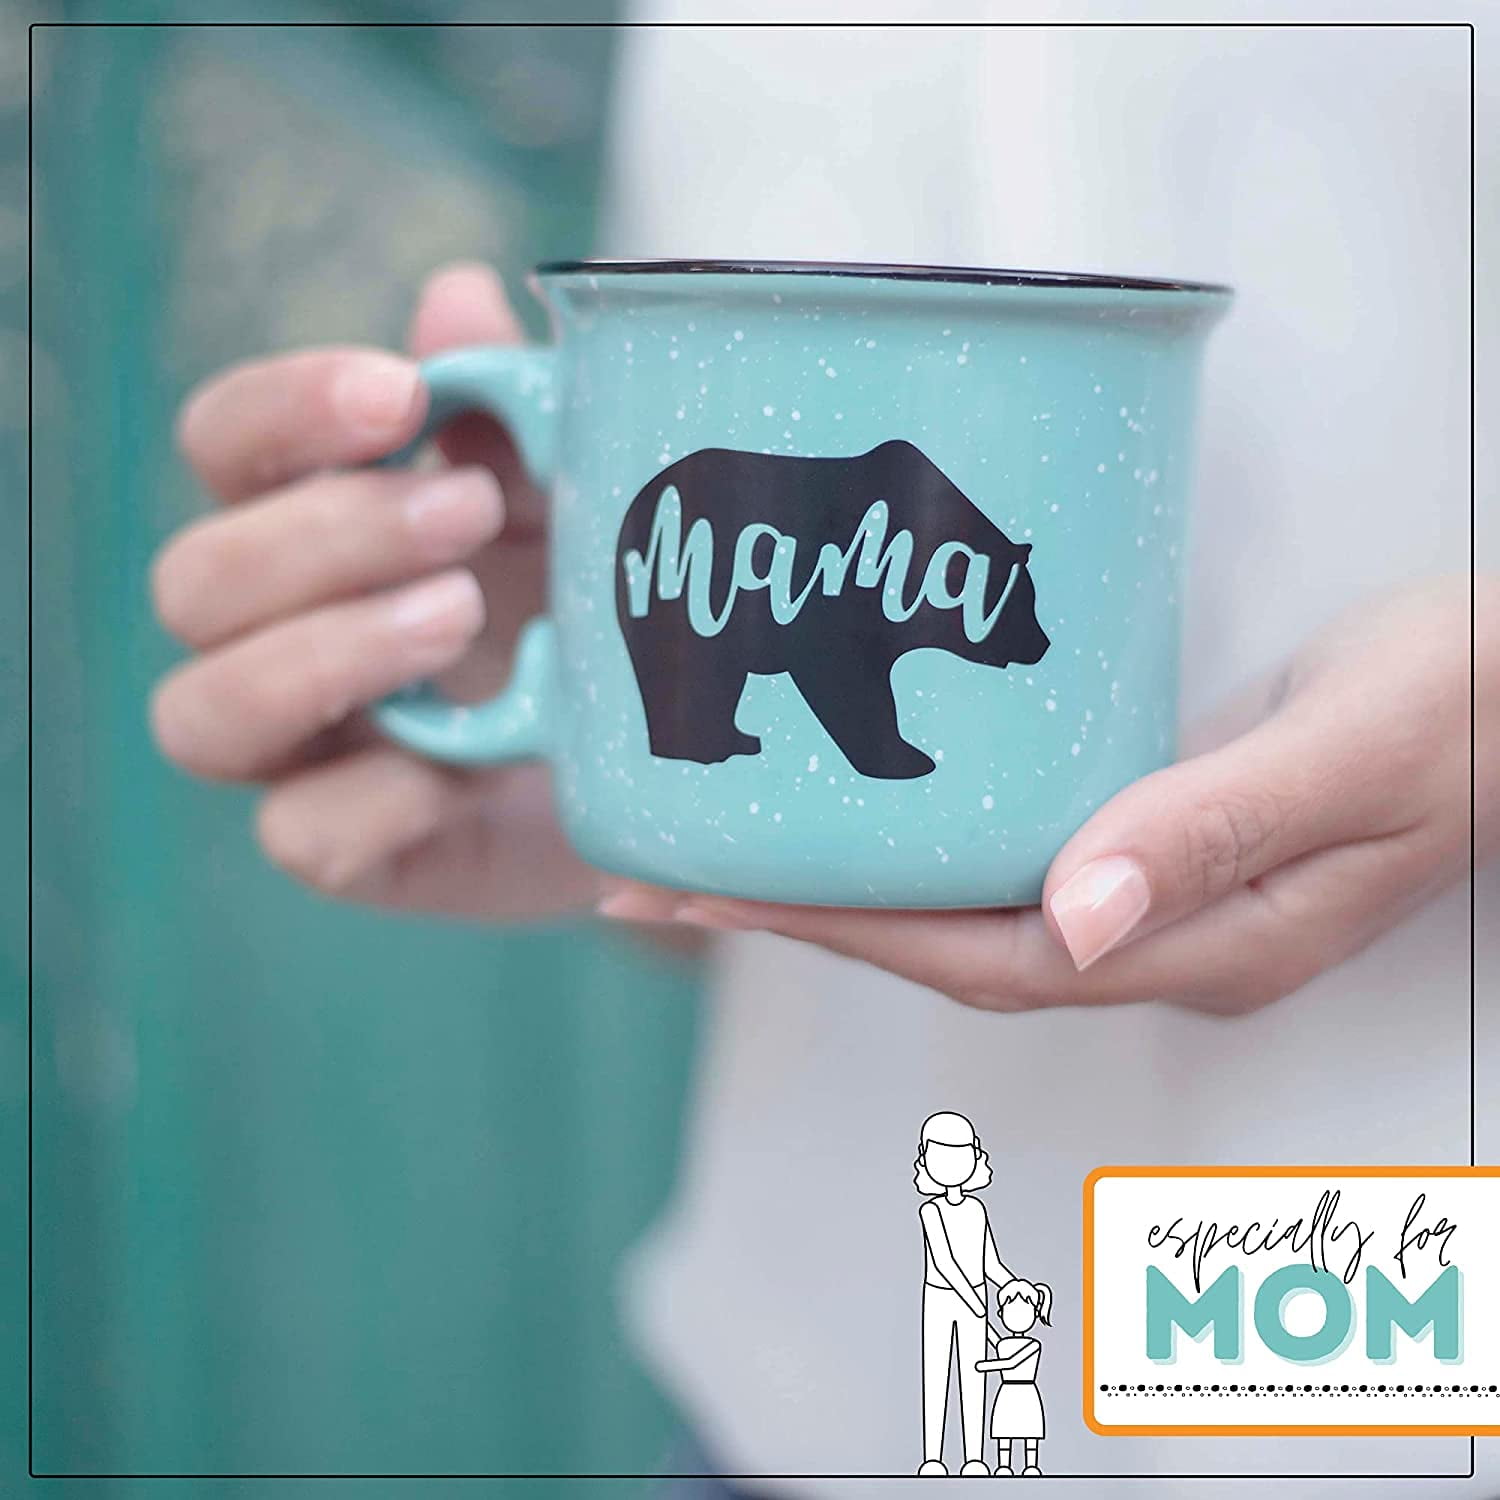 Mama Bear Mug - Unique Coffee Cup for Mom Wife, Funny Happy Birthday Gifts for Women, Cute Custom Mothers Day Mugs for Best Friend, Up to 6 Cubs, Size